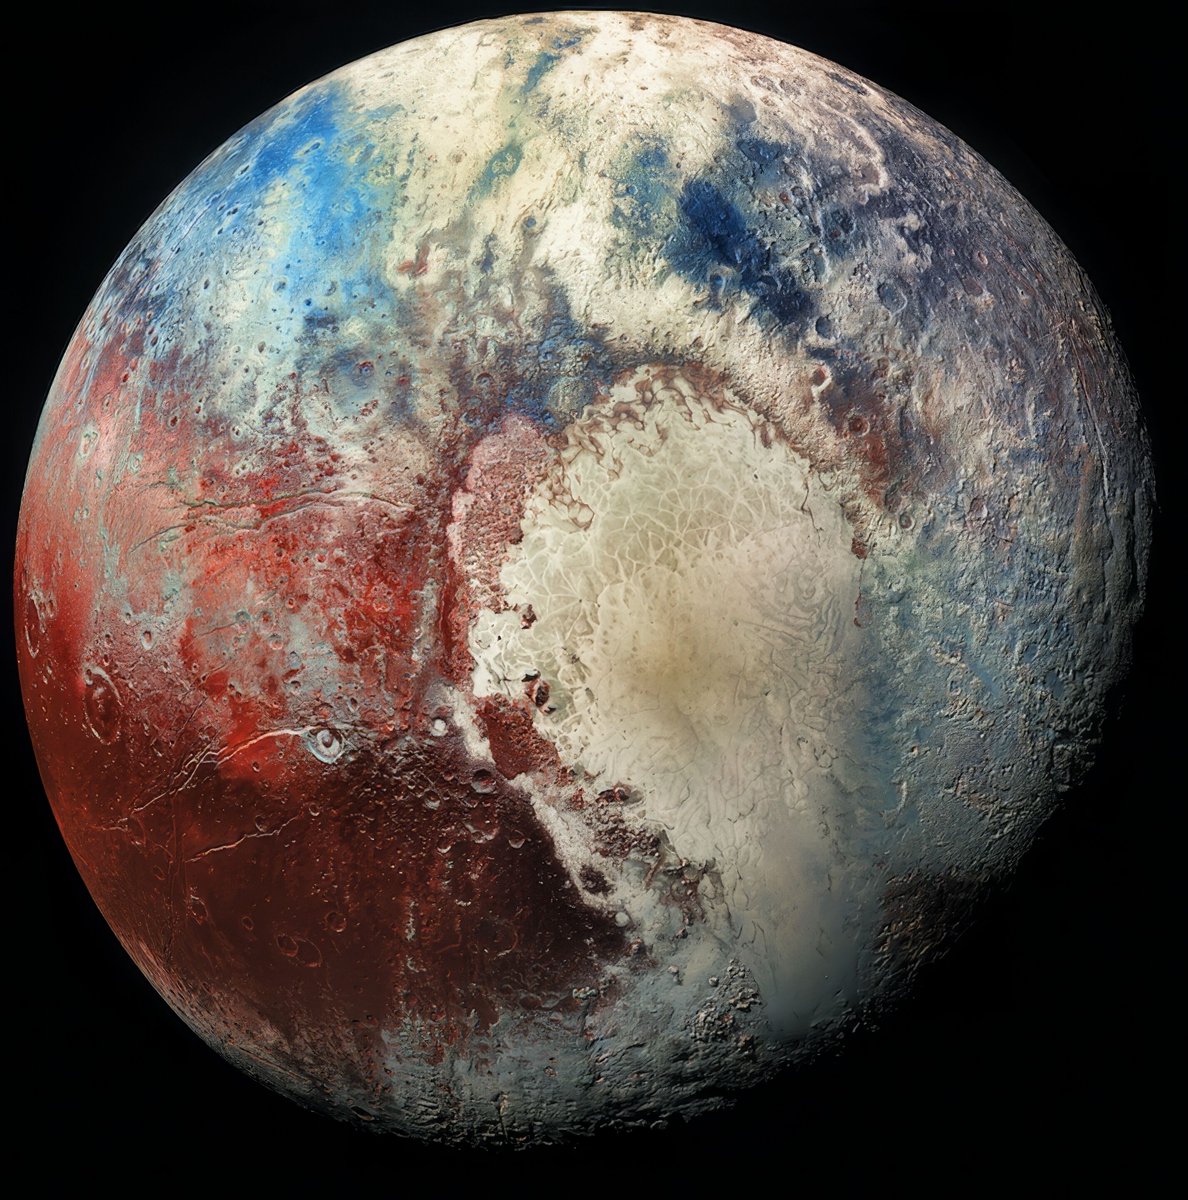 This is Pluto! Pluto used to be the ninth planet of the solar system until 2006 when scientists removed it from the list and declared it a dwarf planet. But Pluto continued orbiting the Sun as before. Pluto doesn't care what others think about it. Be like Pluto!